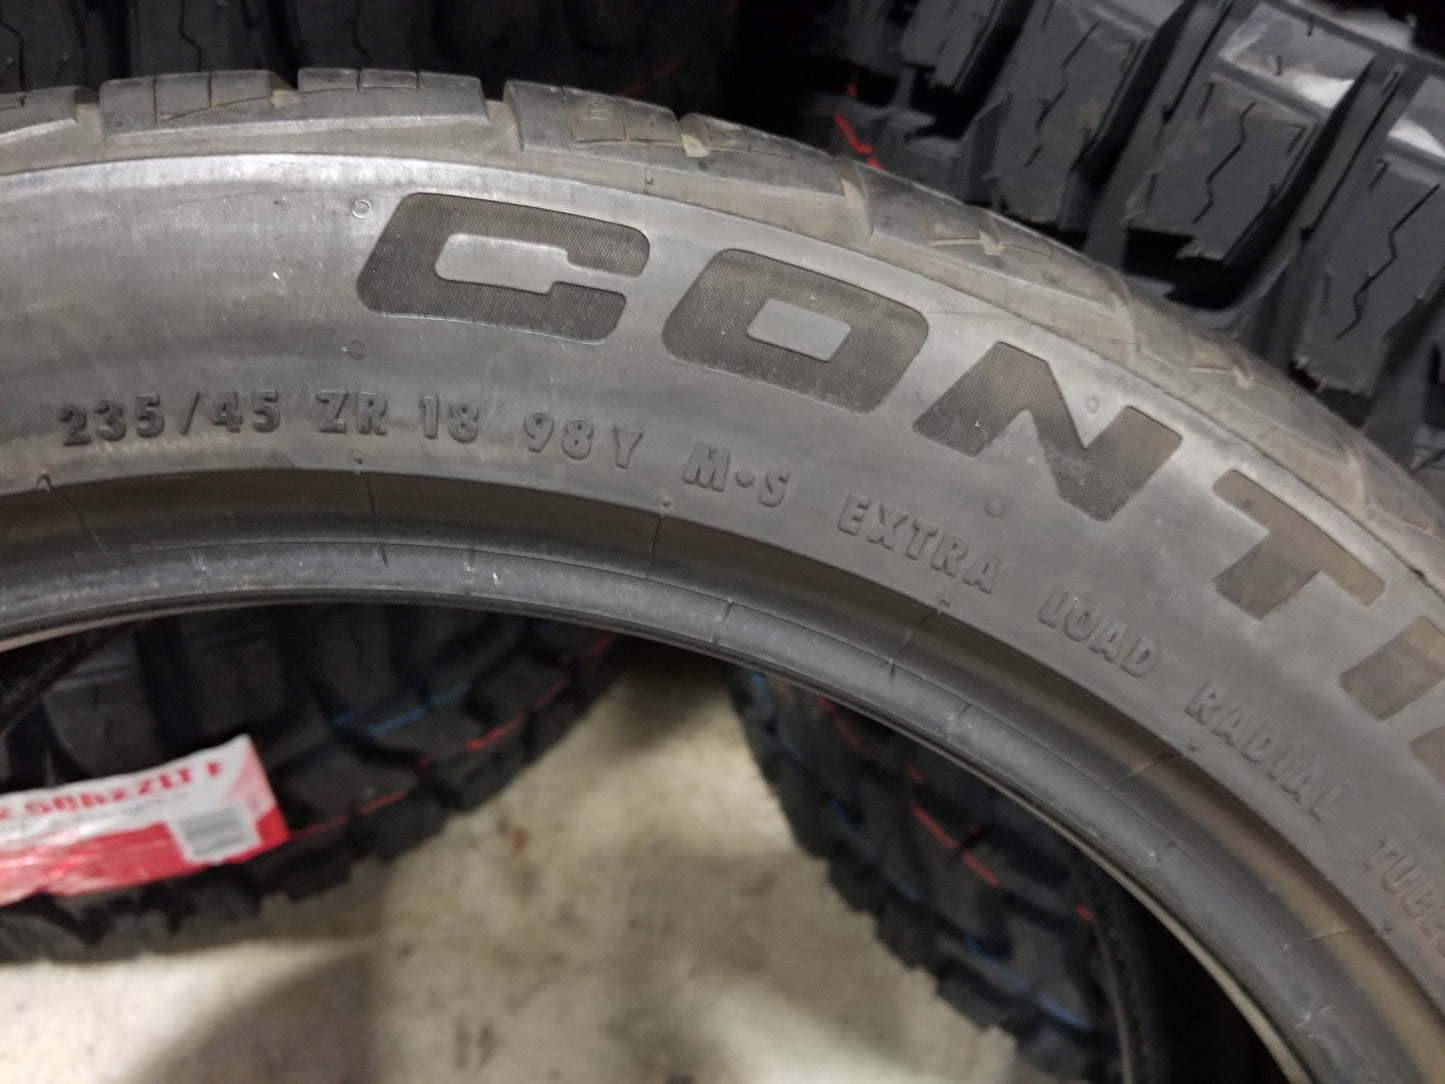 SINGLE 235/45R18 Continental Control Contact Sport A/S 98 Y XL - Used Tires